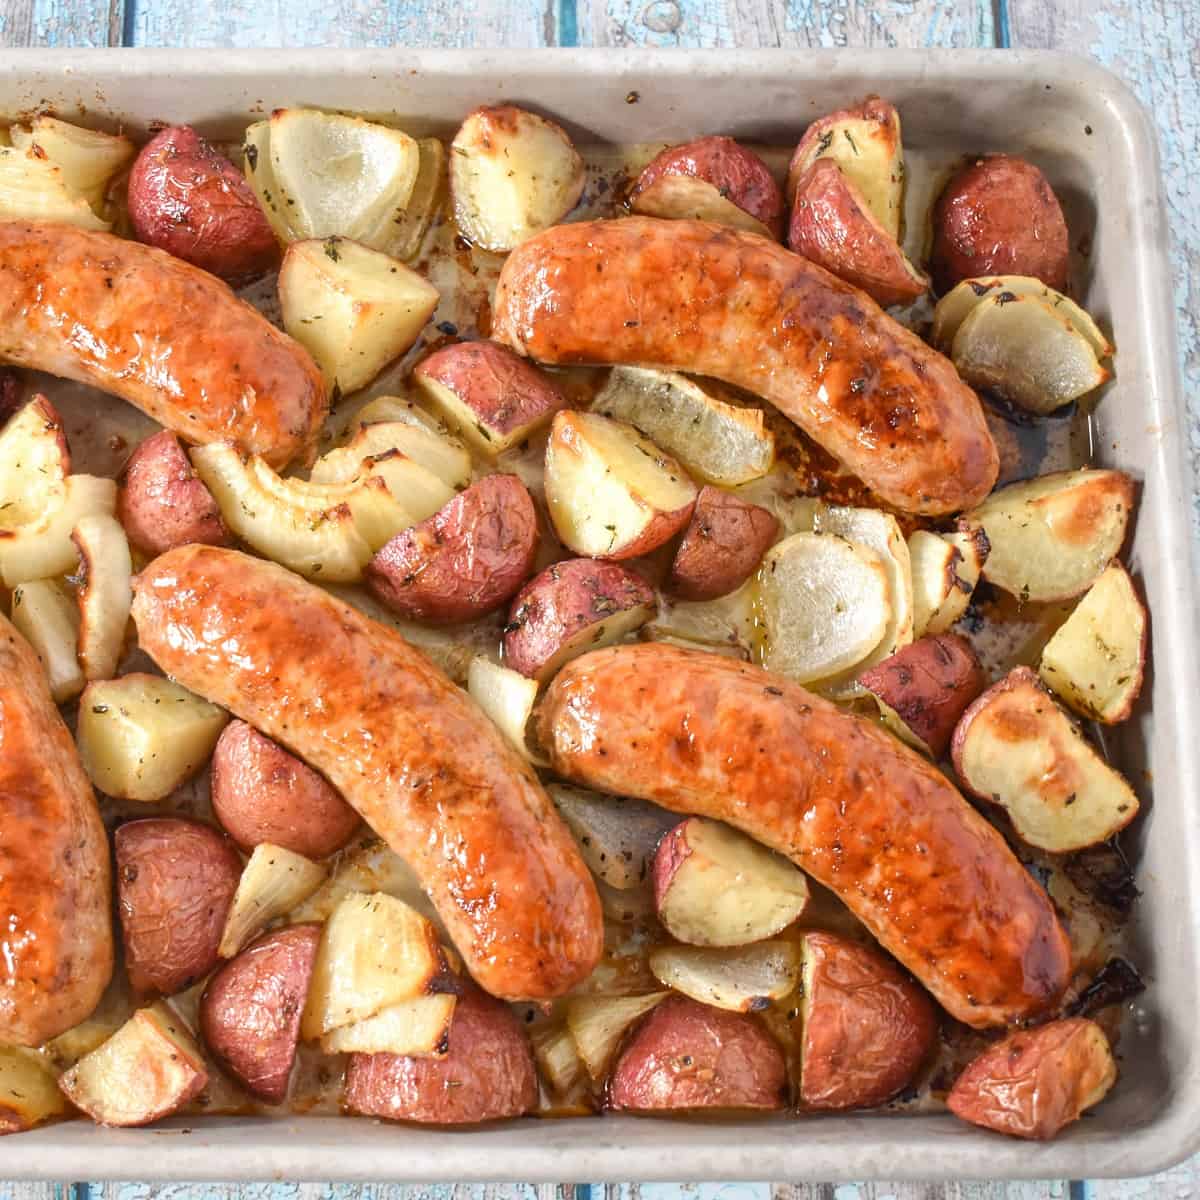 https://www.cook2eatwell.com/wp-content/uploads/2021/01/baked-italian-sausage-and-potatoes-image.jpg